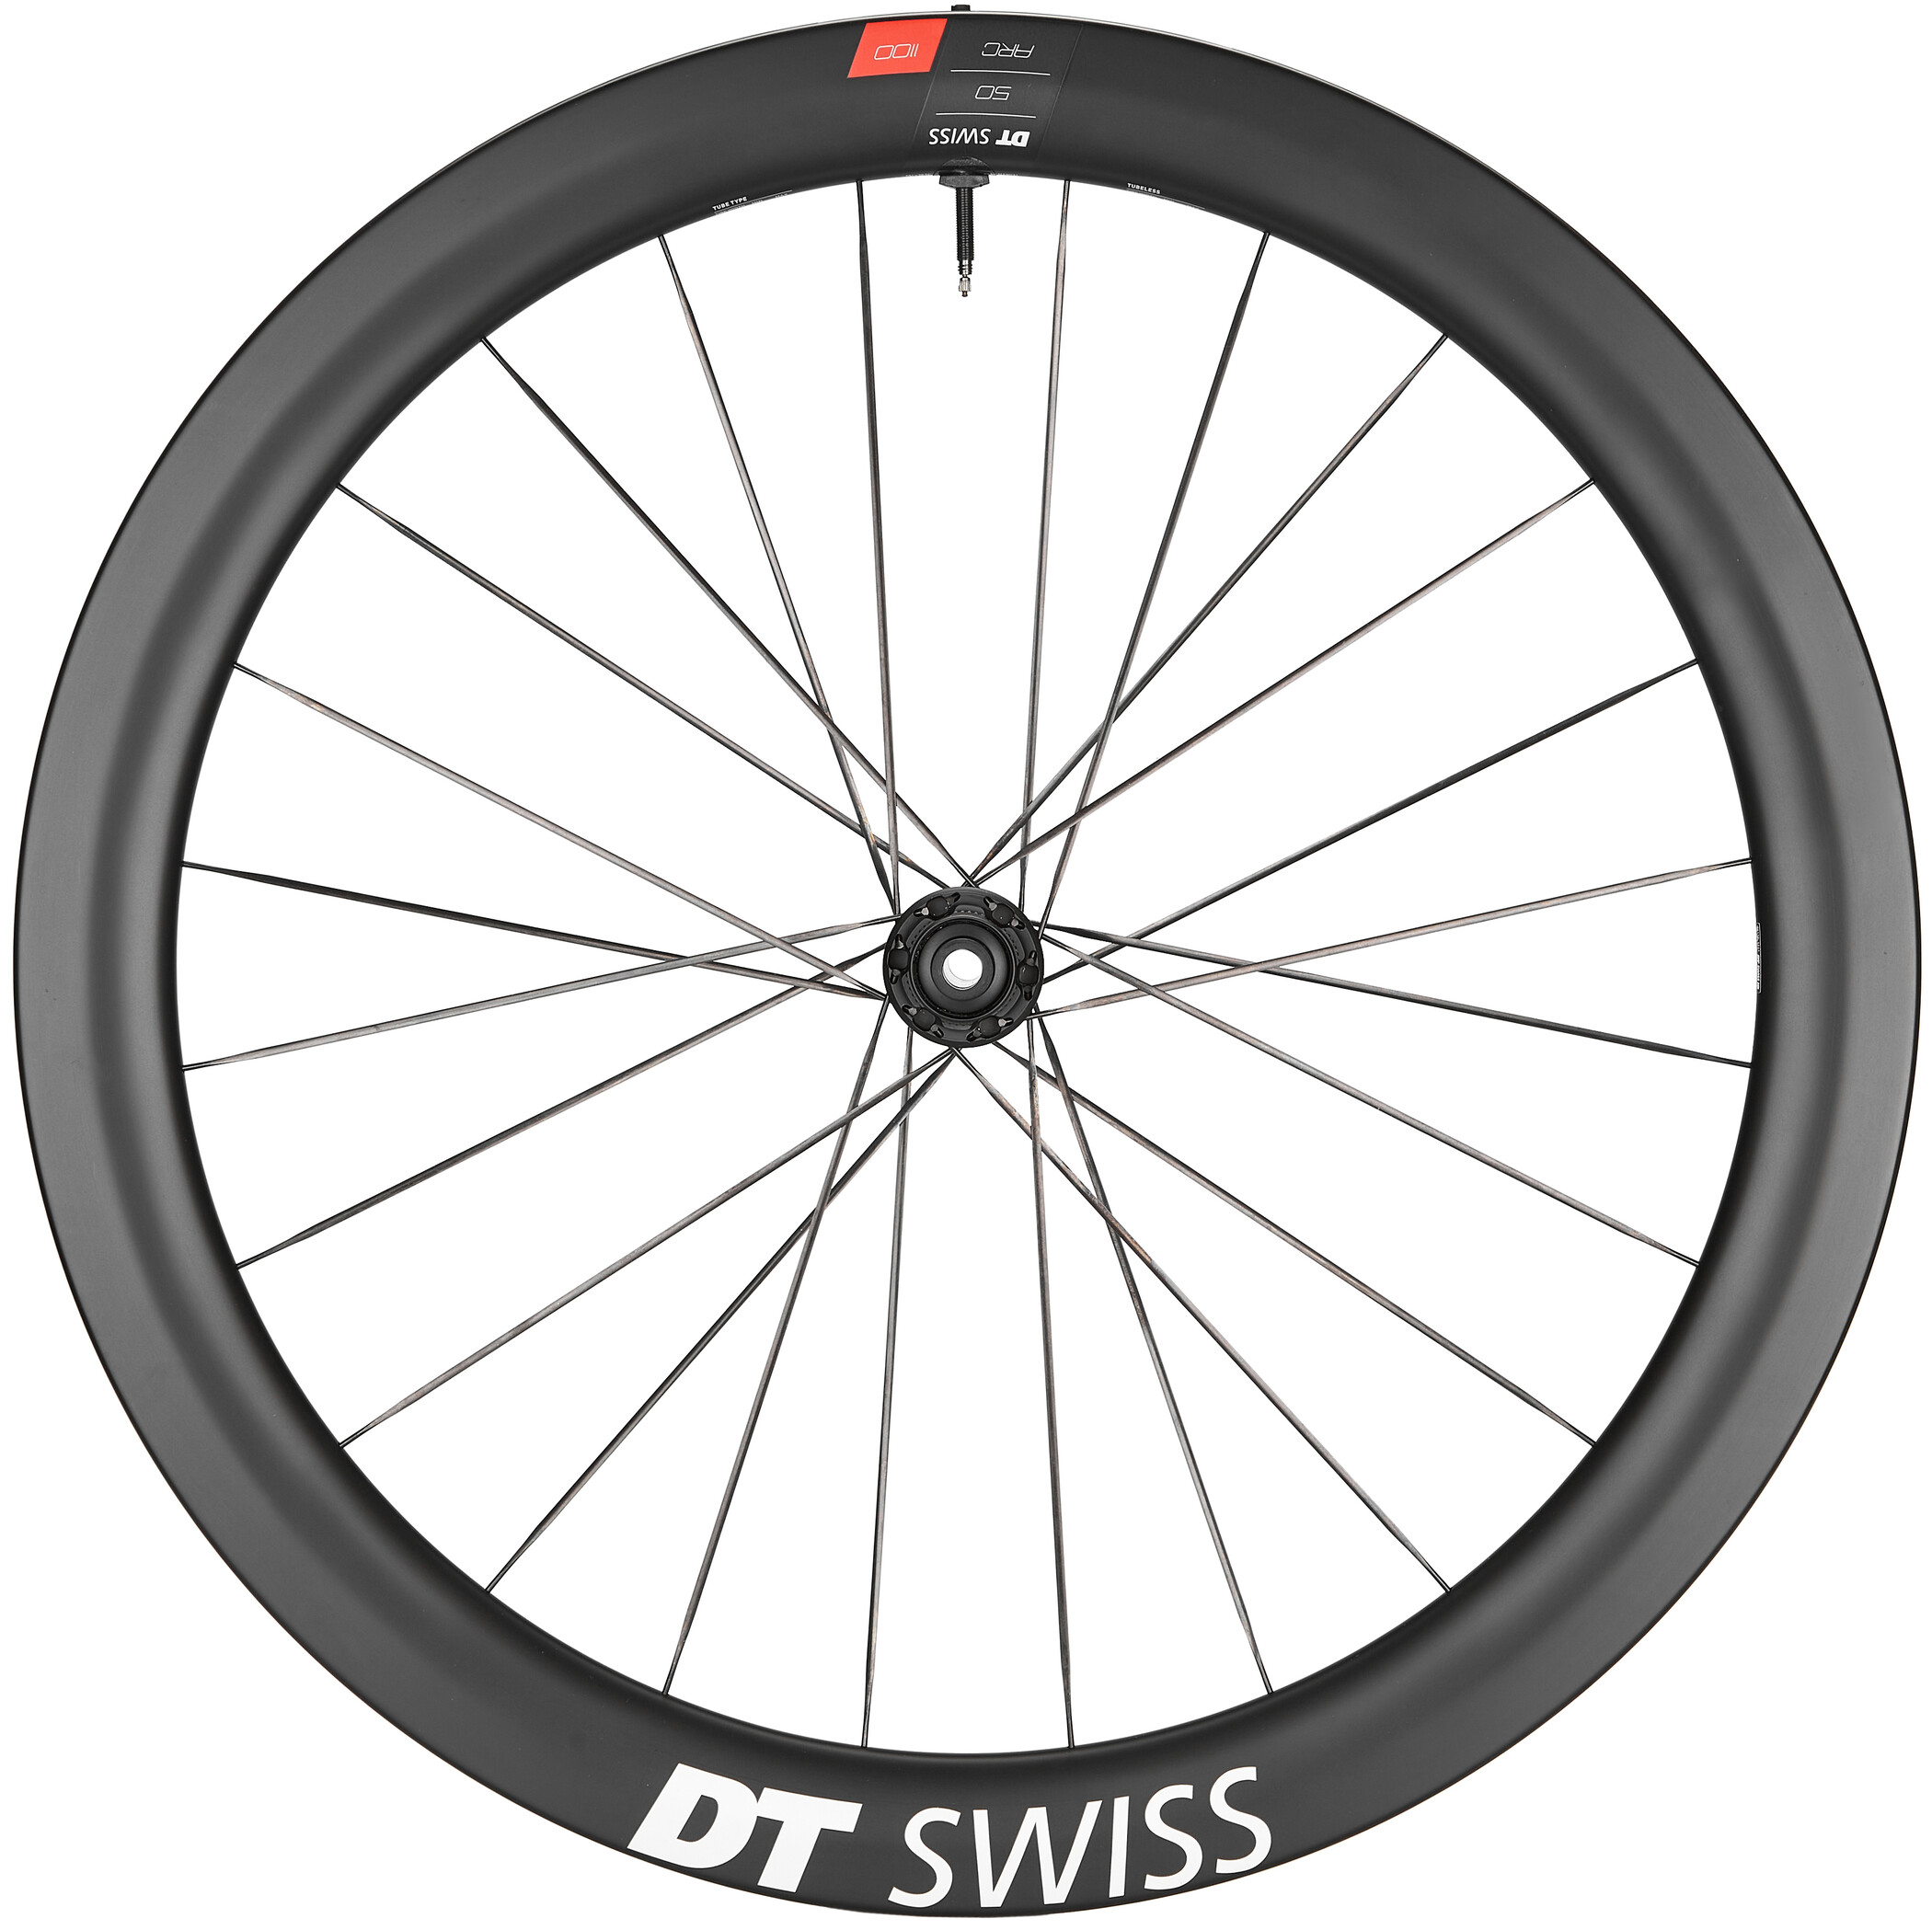 DT Swiss 29" Vorderrad Felge Rival 19 Shimano HB-M525A Nabe silber SSP DT Swiss Speiche 